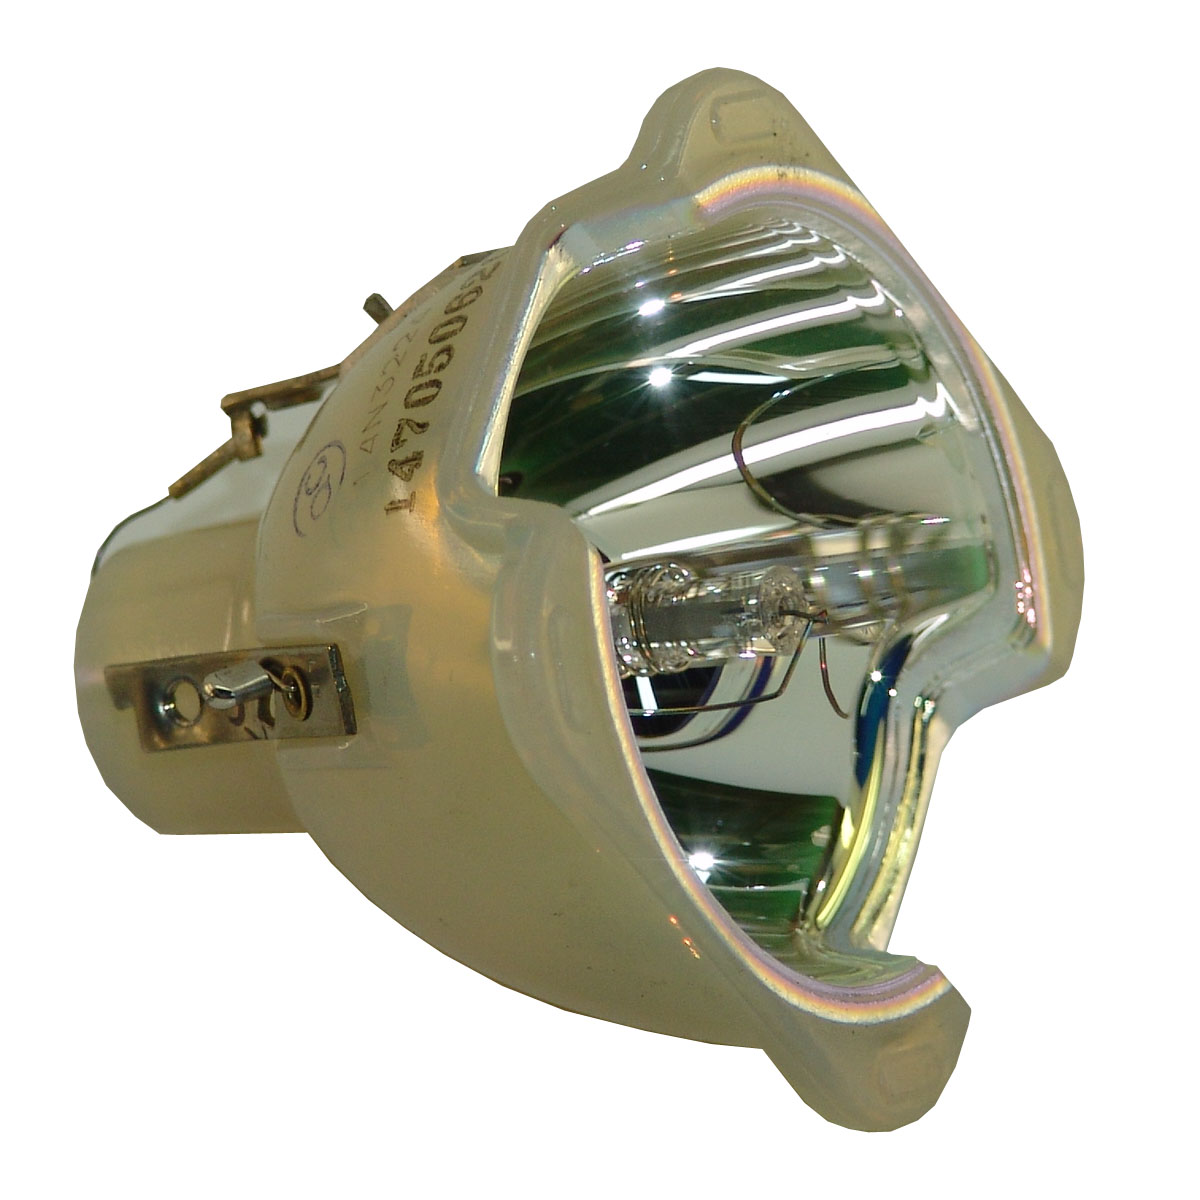 Original Philips Projector Lamp Replacement for BenQ 59.J9401.CG1 (Bulb Only) - image 2 of 6